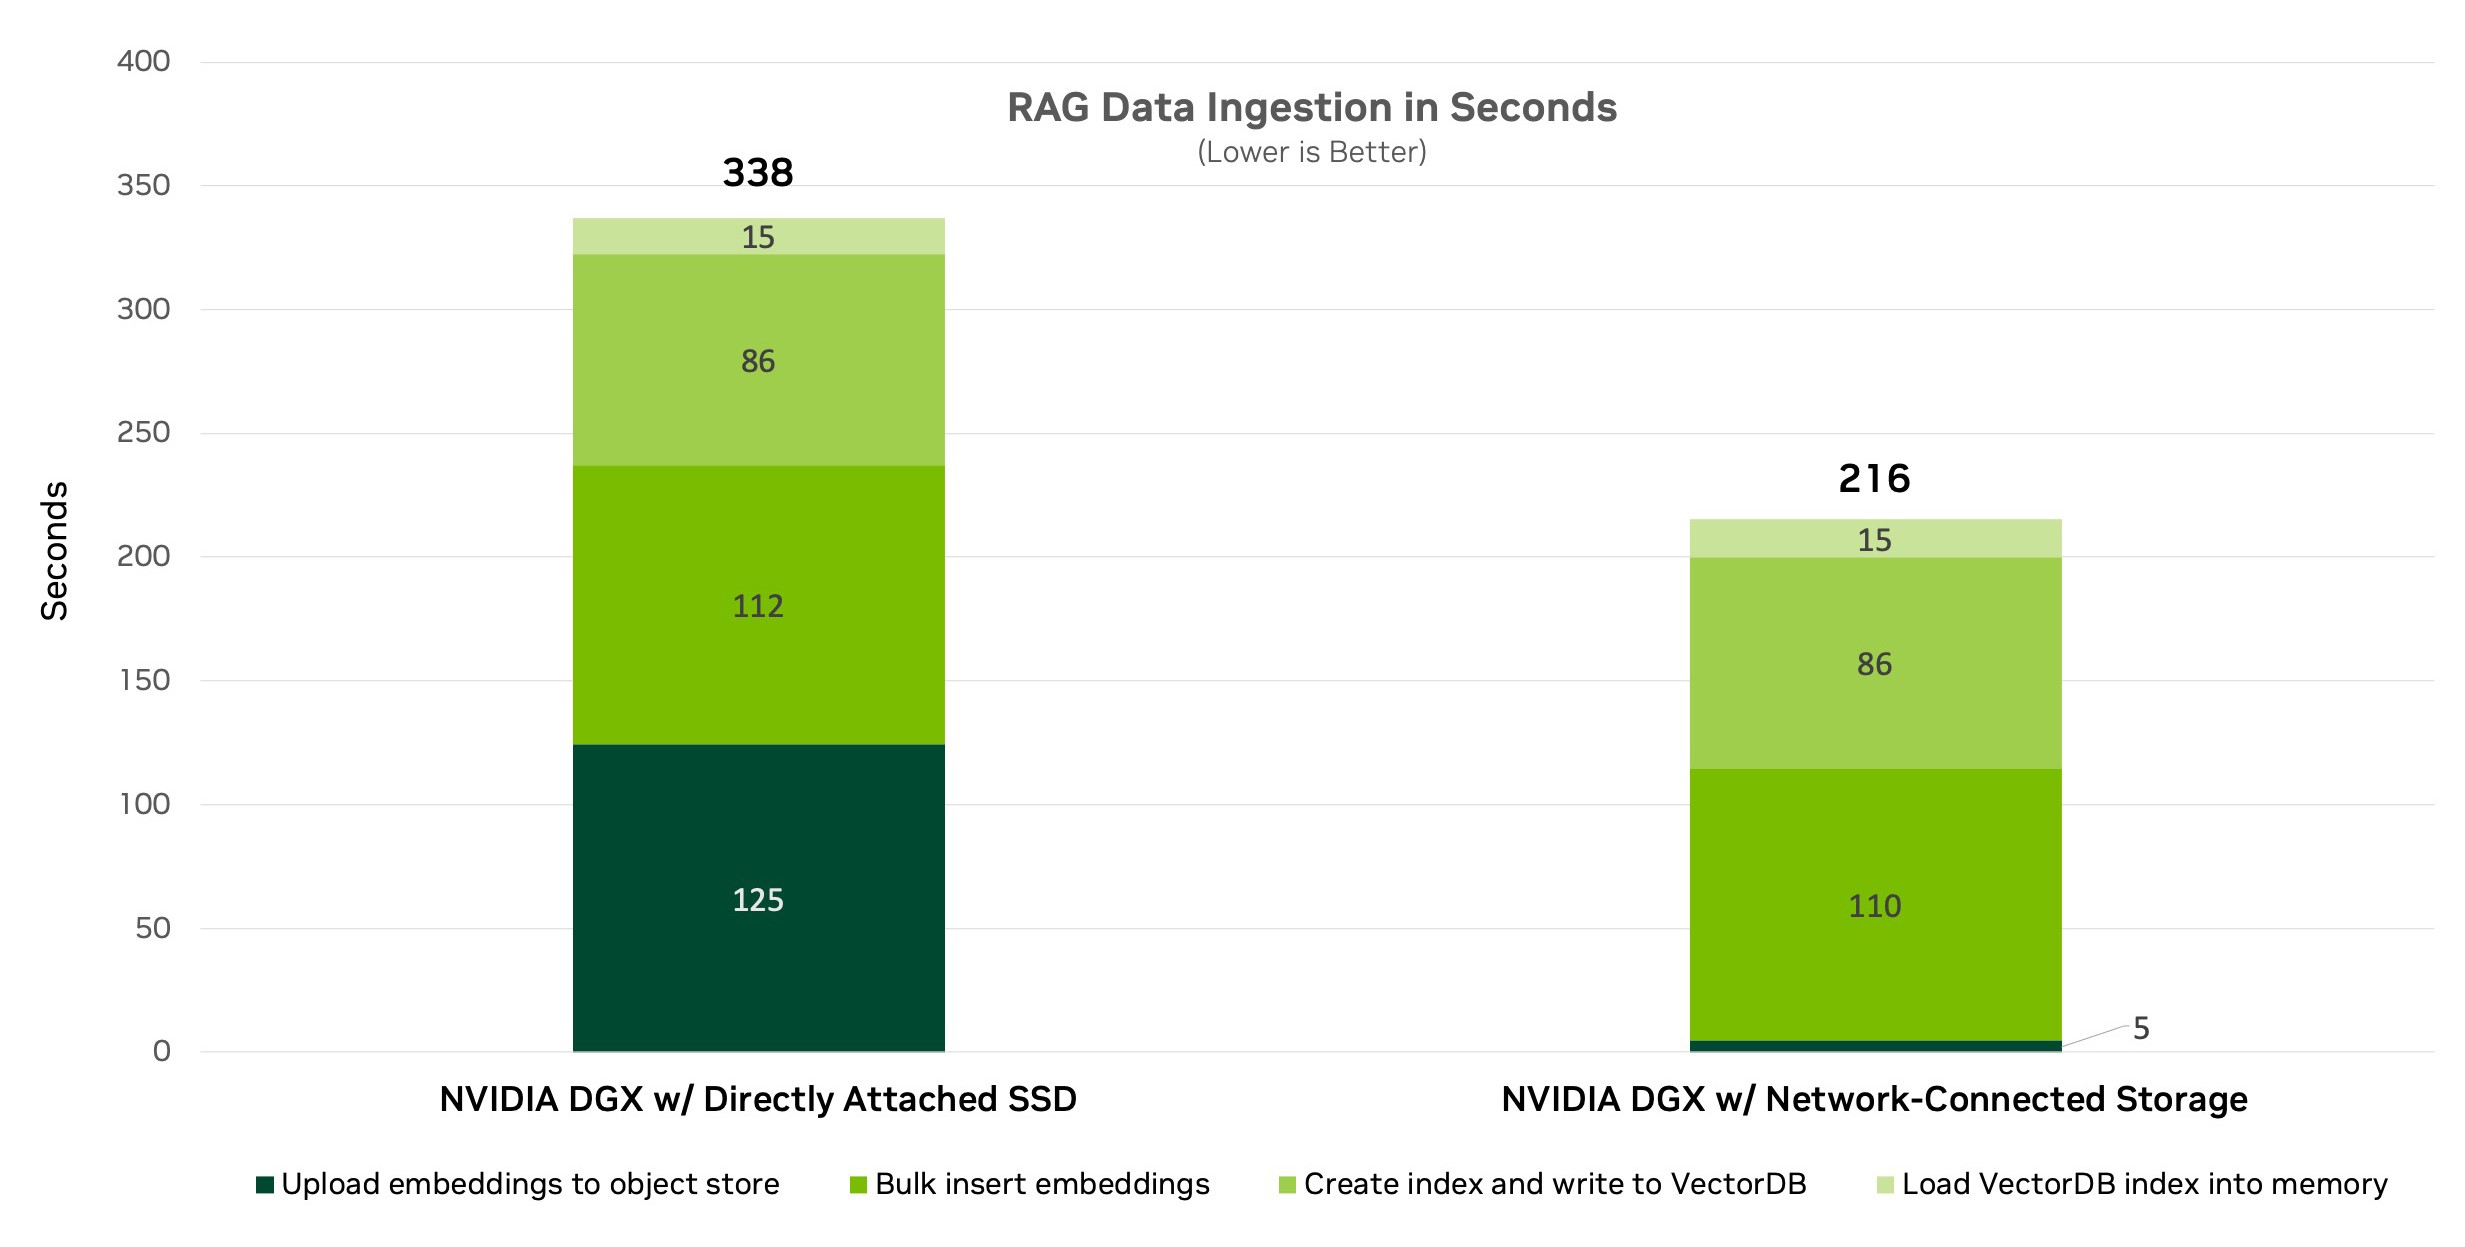 Stacked bar chart shows that an NVIDIA DGX with DAS took 338 seconds to finish the data ingestion workload (1 million vectors) and a DGX with network-connected storage took only 216 seconds to finish the same workload. 